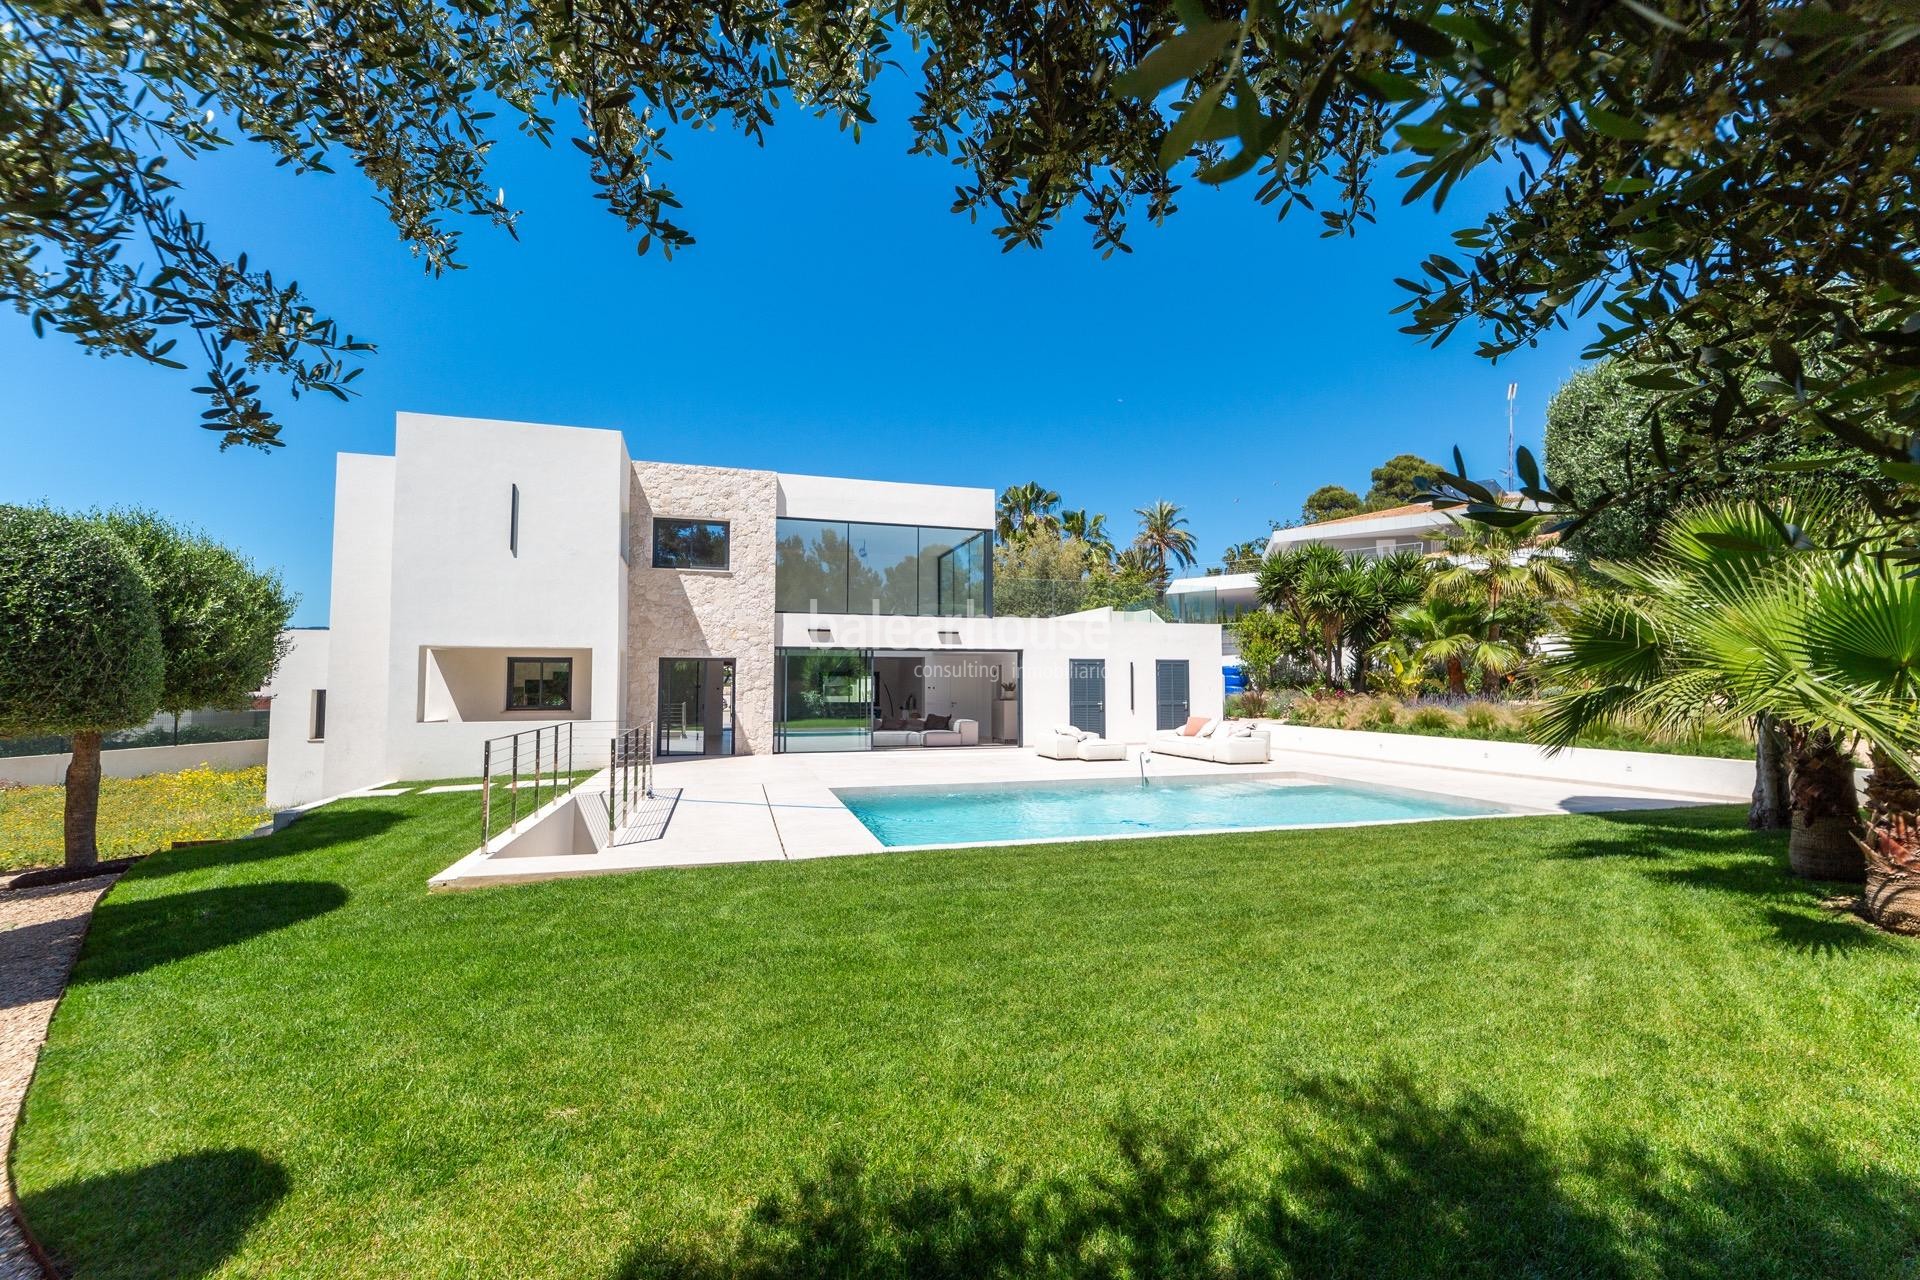 Impeccable Modern design villa full of light and large garden and pool spaces in Santa Ponsa